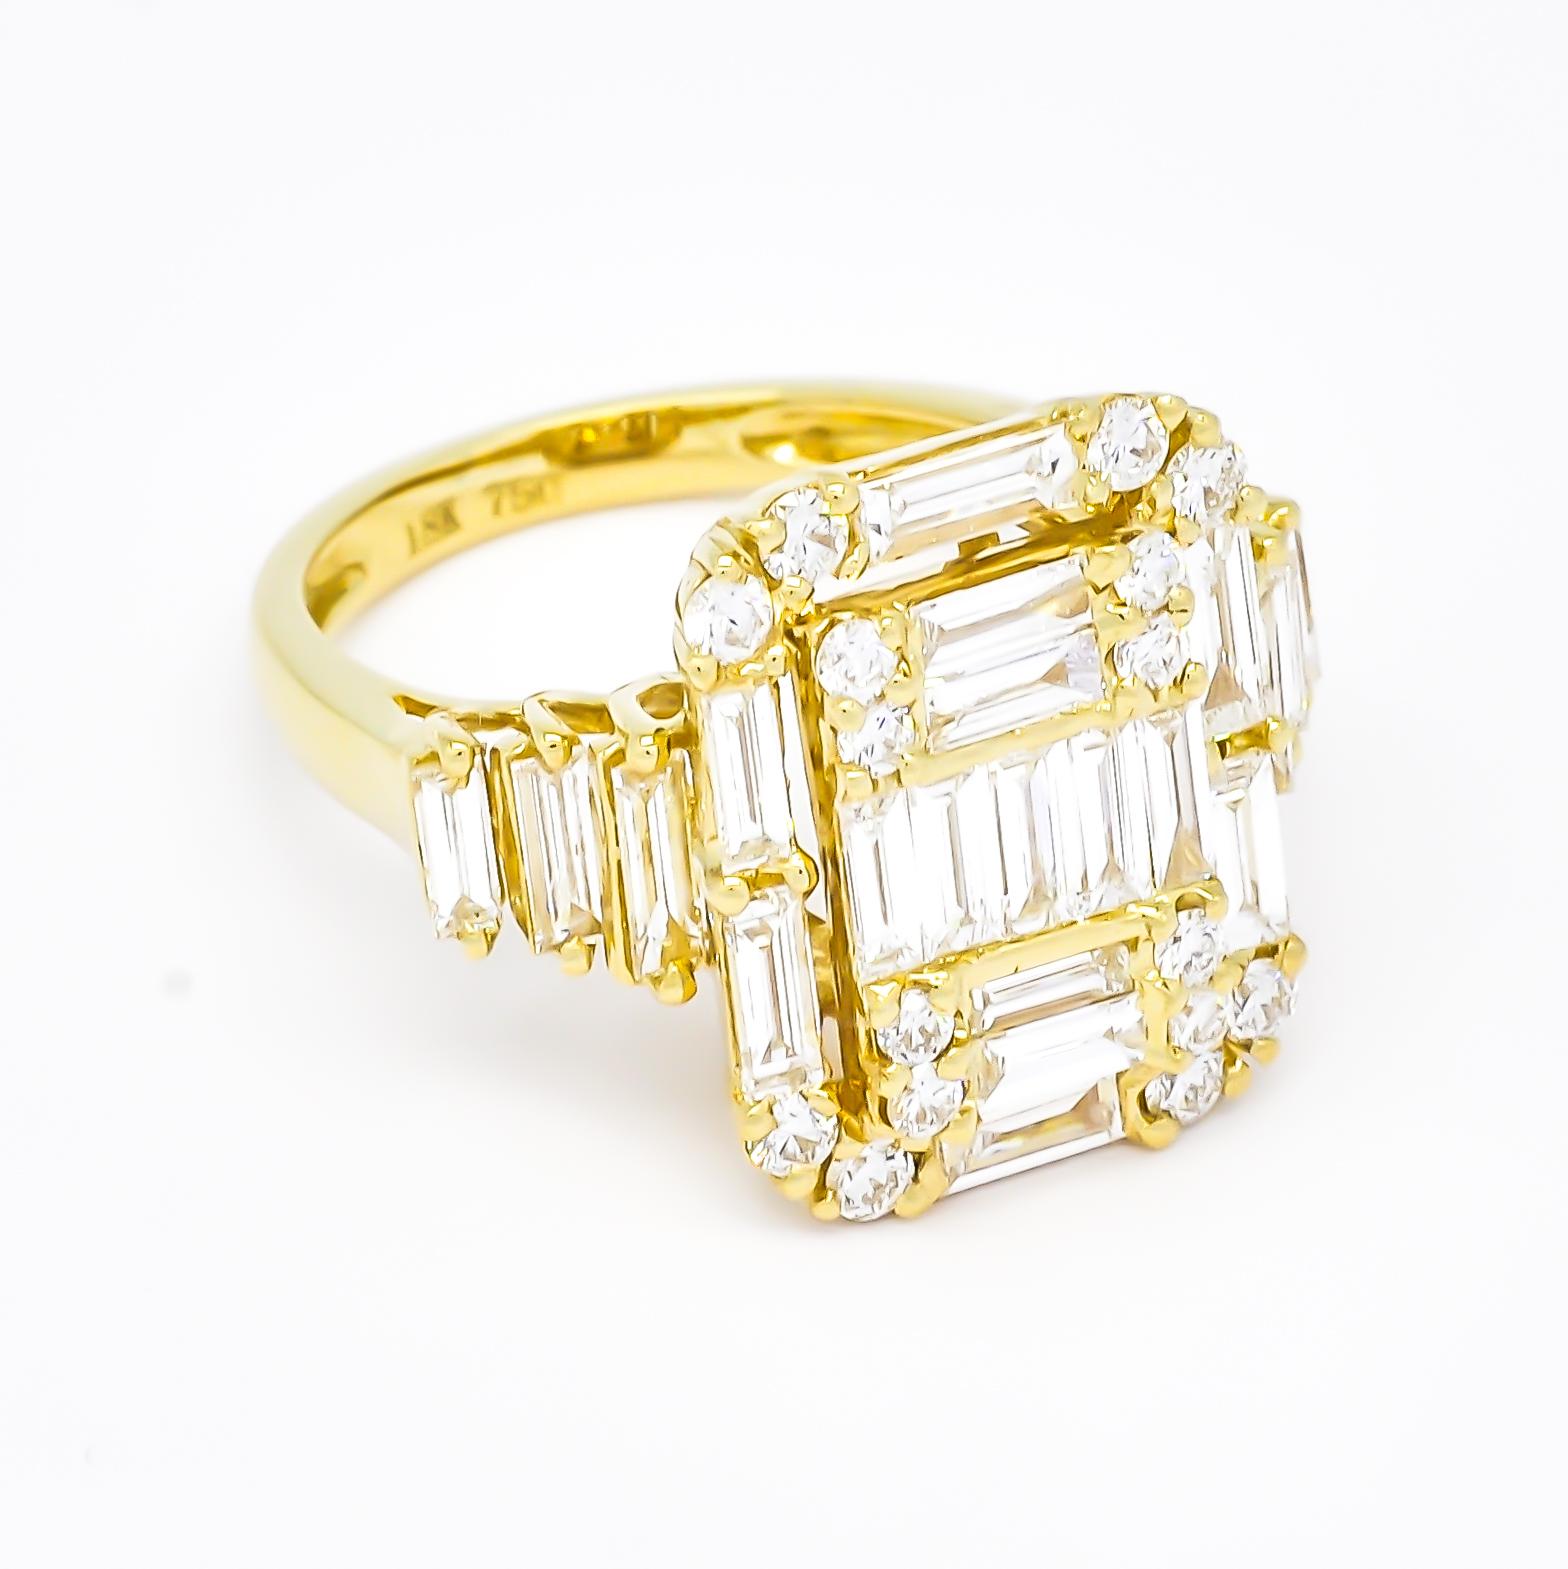 This 18KT Yellow Gold Art Deco Baguette Round Diamond Illusion Step Cut Bridal Ring is luxurious and elegant. The intricate design features a mesmerizing illusion step cut, showcasing the sparkling round diamonds in a stunning baguette setting.